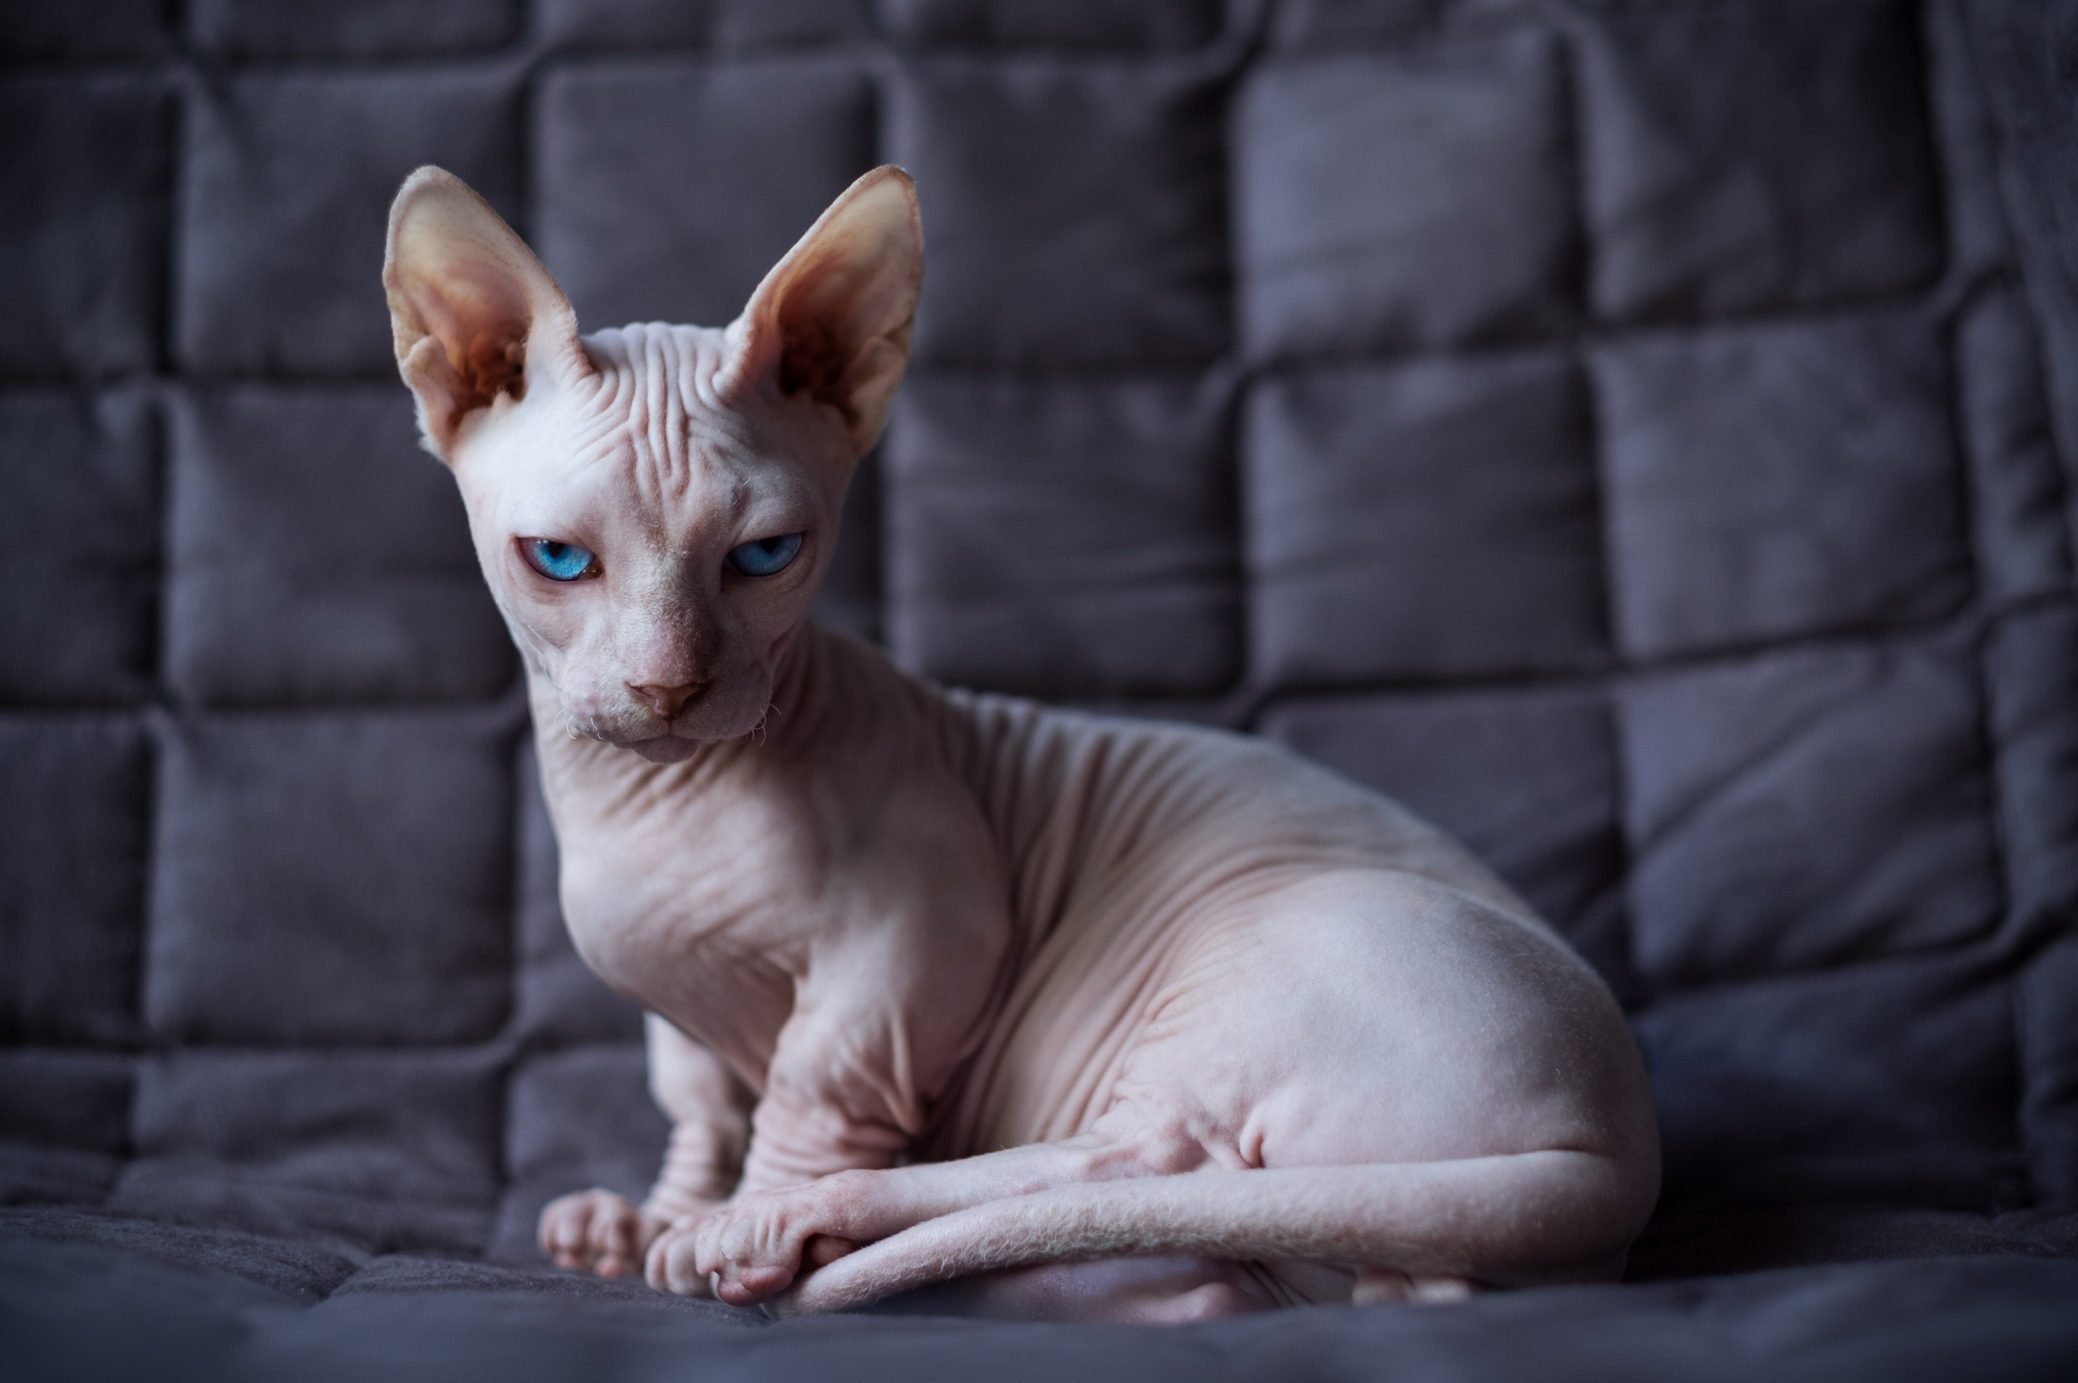 31 Ugly Cats That Are Still Cute | Reader's Digest